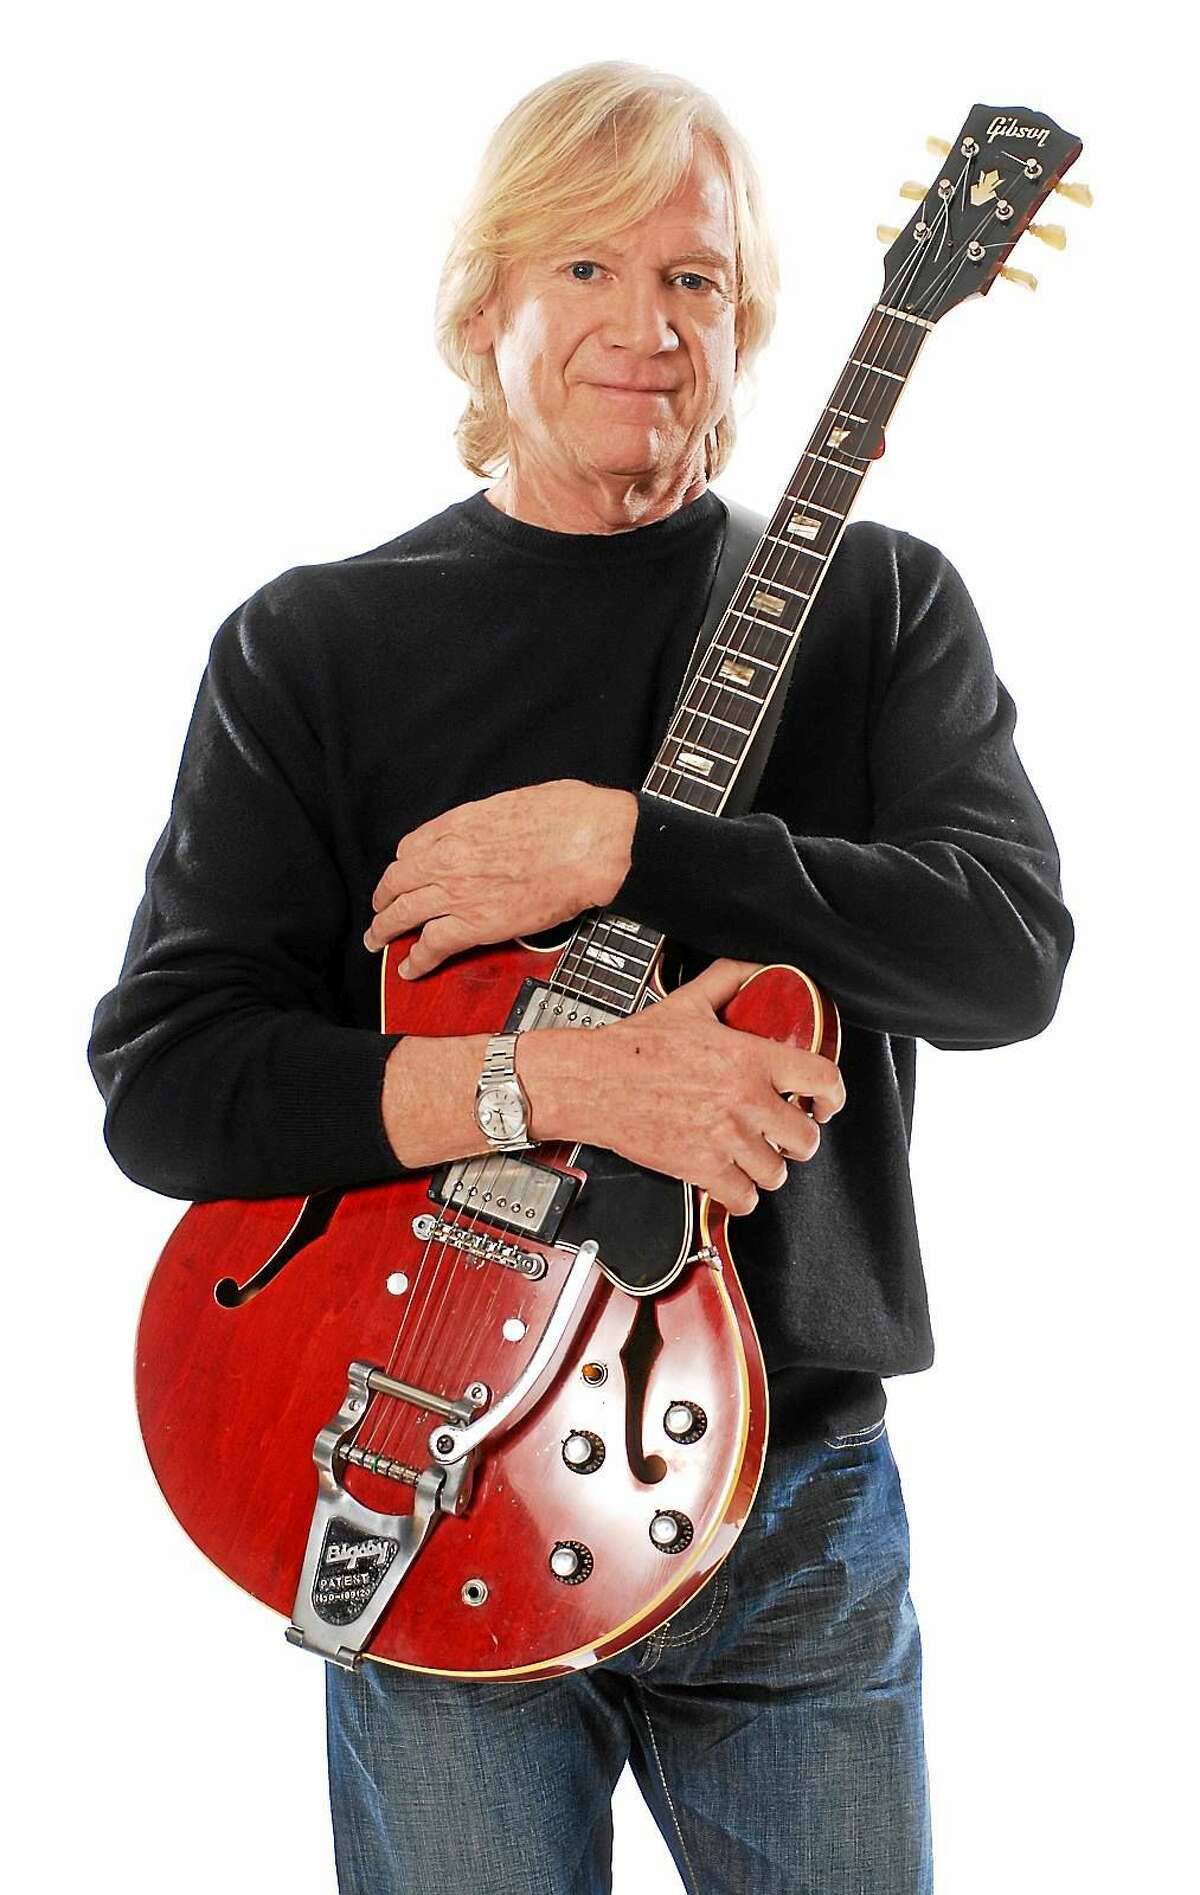 Photo courtesy of Justin Hayward Justin Hayward will appear in a rare solo performance at Infinity Hall in Hartford on Saturday, Aug. 22. The opening act is English guitarist Mike Dawes. For tickets or more information on this upcoming concert you can call toll free 866-666-6306 or visit www.infinityhall.com.